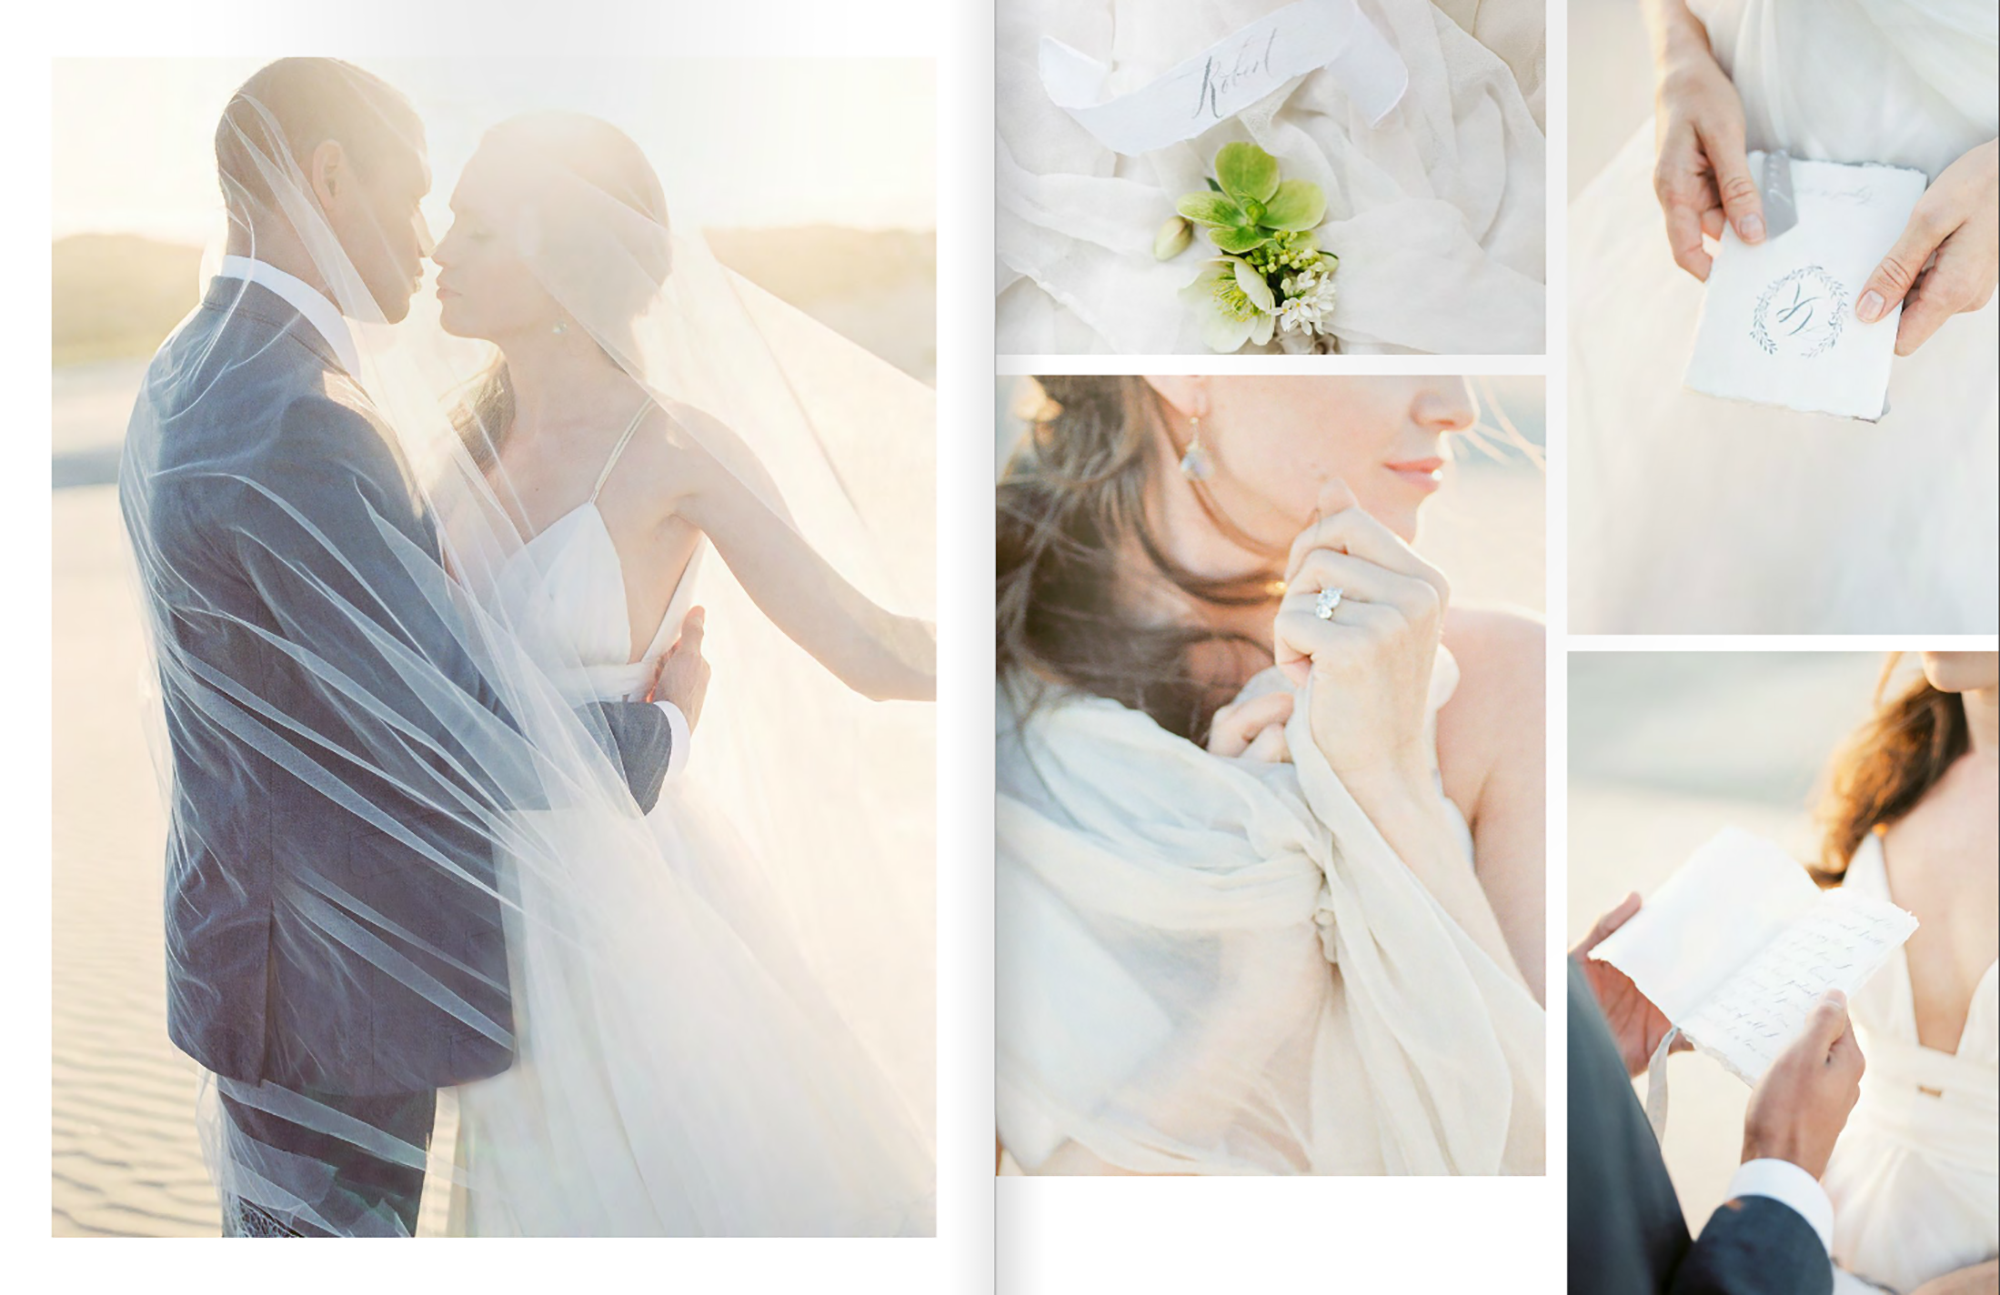 Excerpts from a Santa Barbara elopement published in Tulle Magazine.